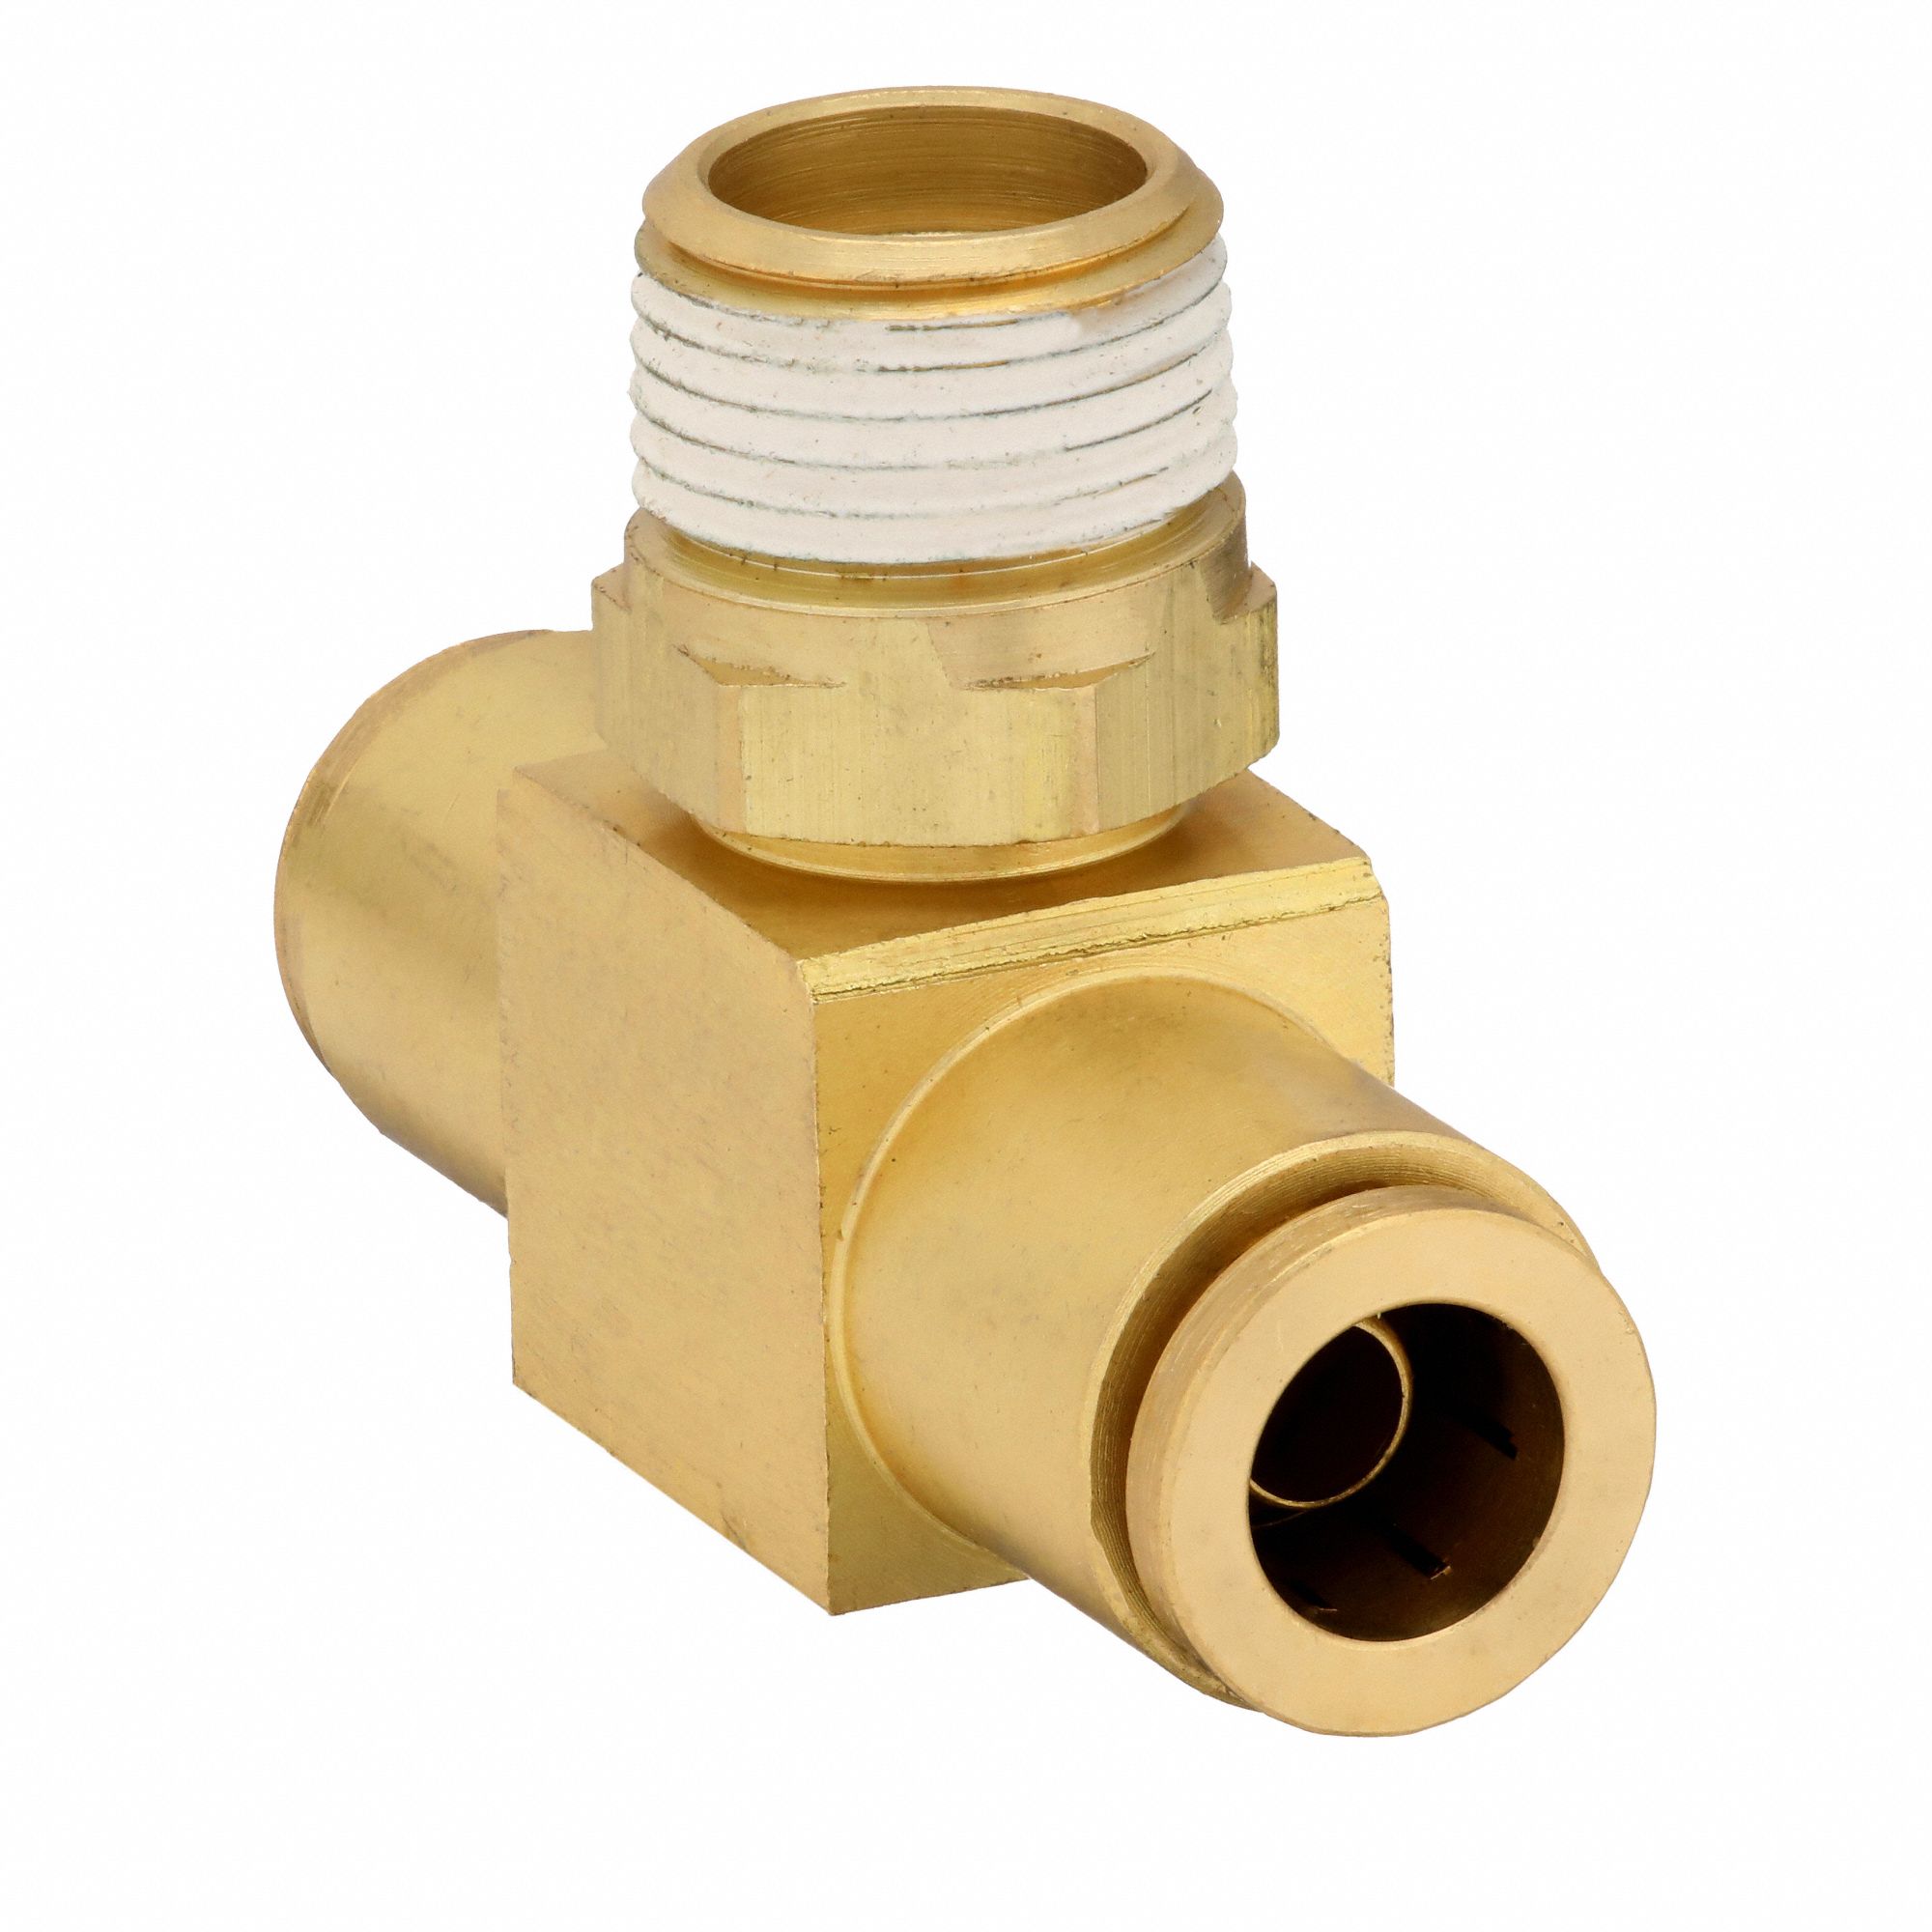 Swivel Male Branch Tee: Brass, Push-to-Connect x Push-to-Connect x MNPT,  For 1/4 in x 1/4 in Tube OD